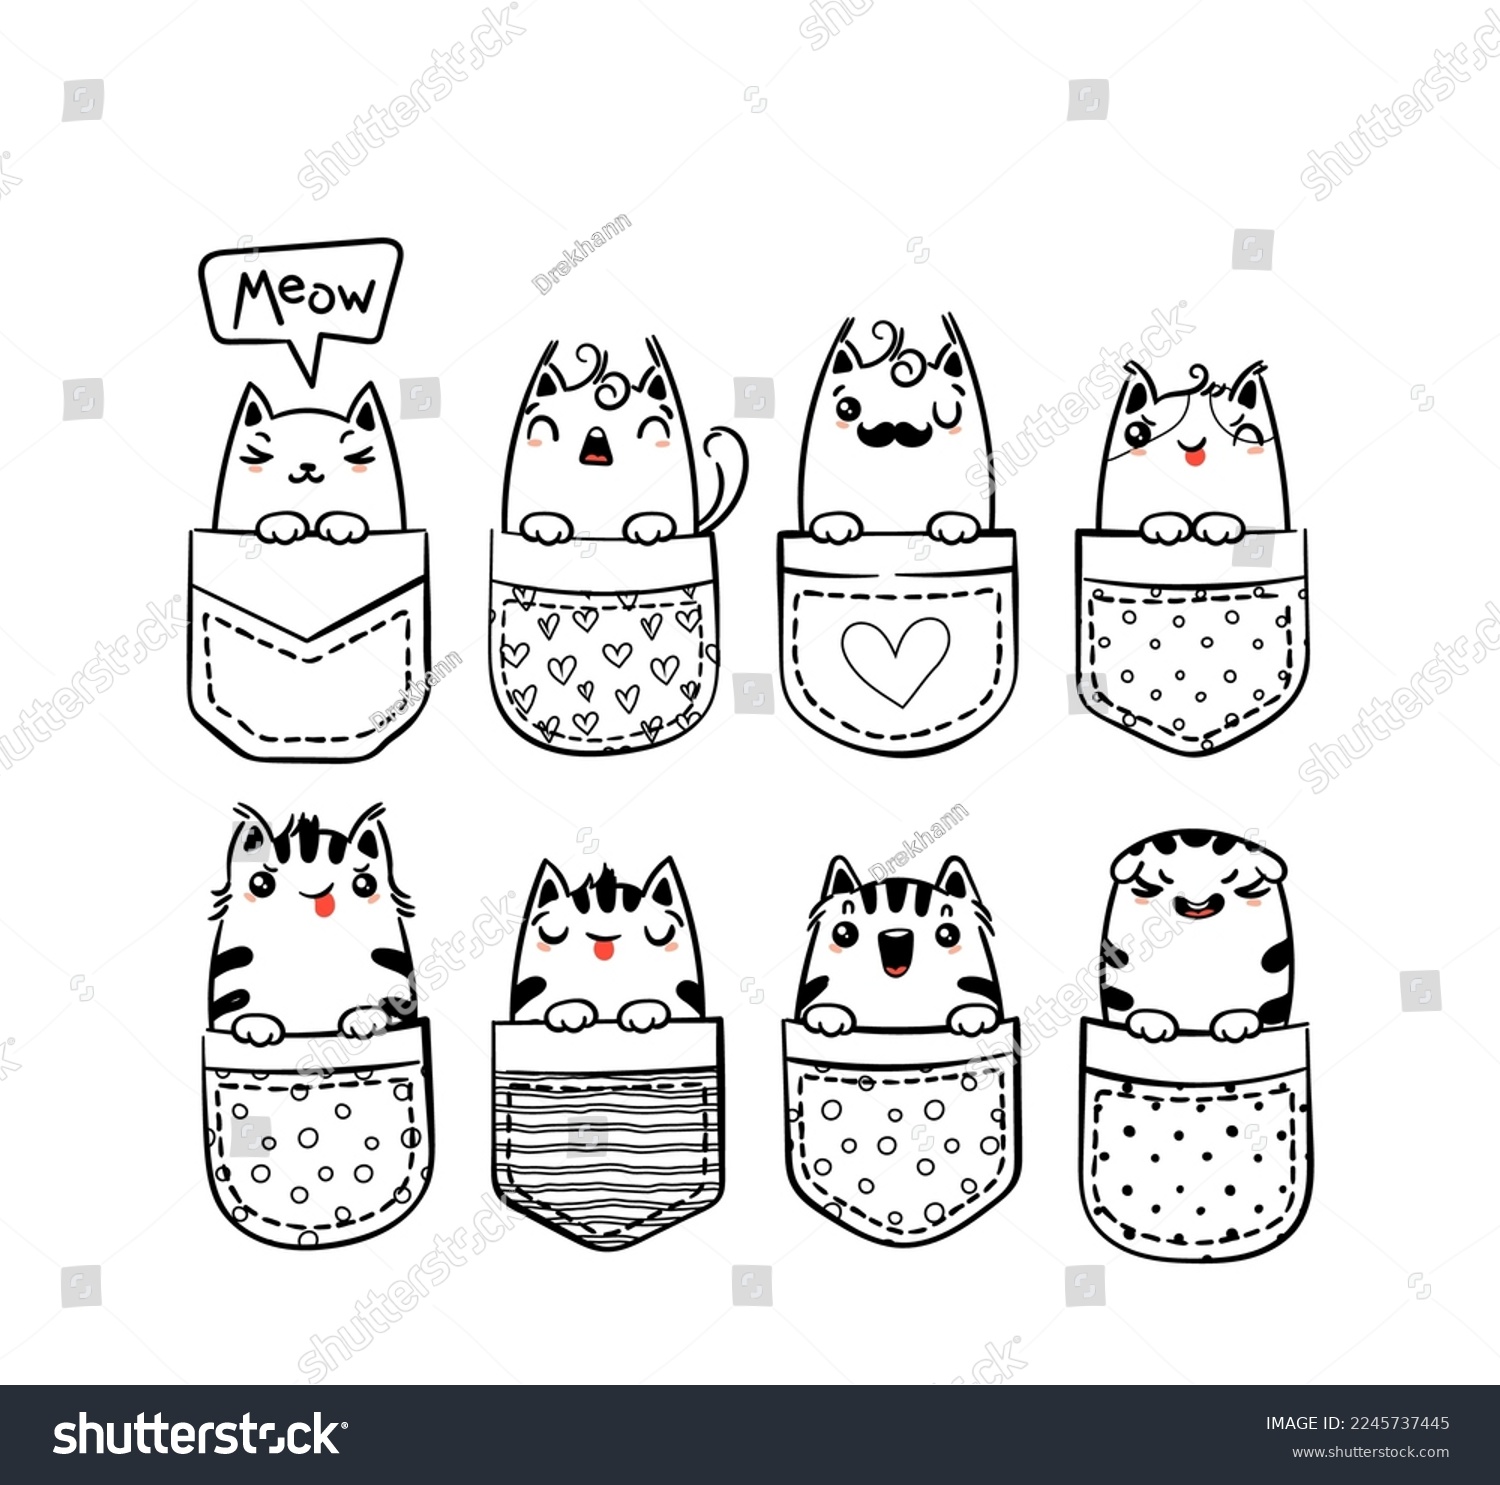 SVG of Hand Drawn Cat, Kitty, Kitten. Cute kawaii animals sitting in a pocket. Vector sketch, print design, illustration, children print on t-shirt, coloring pages svg